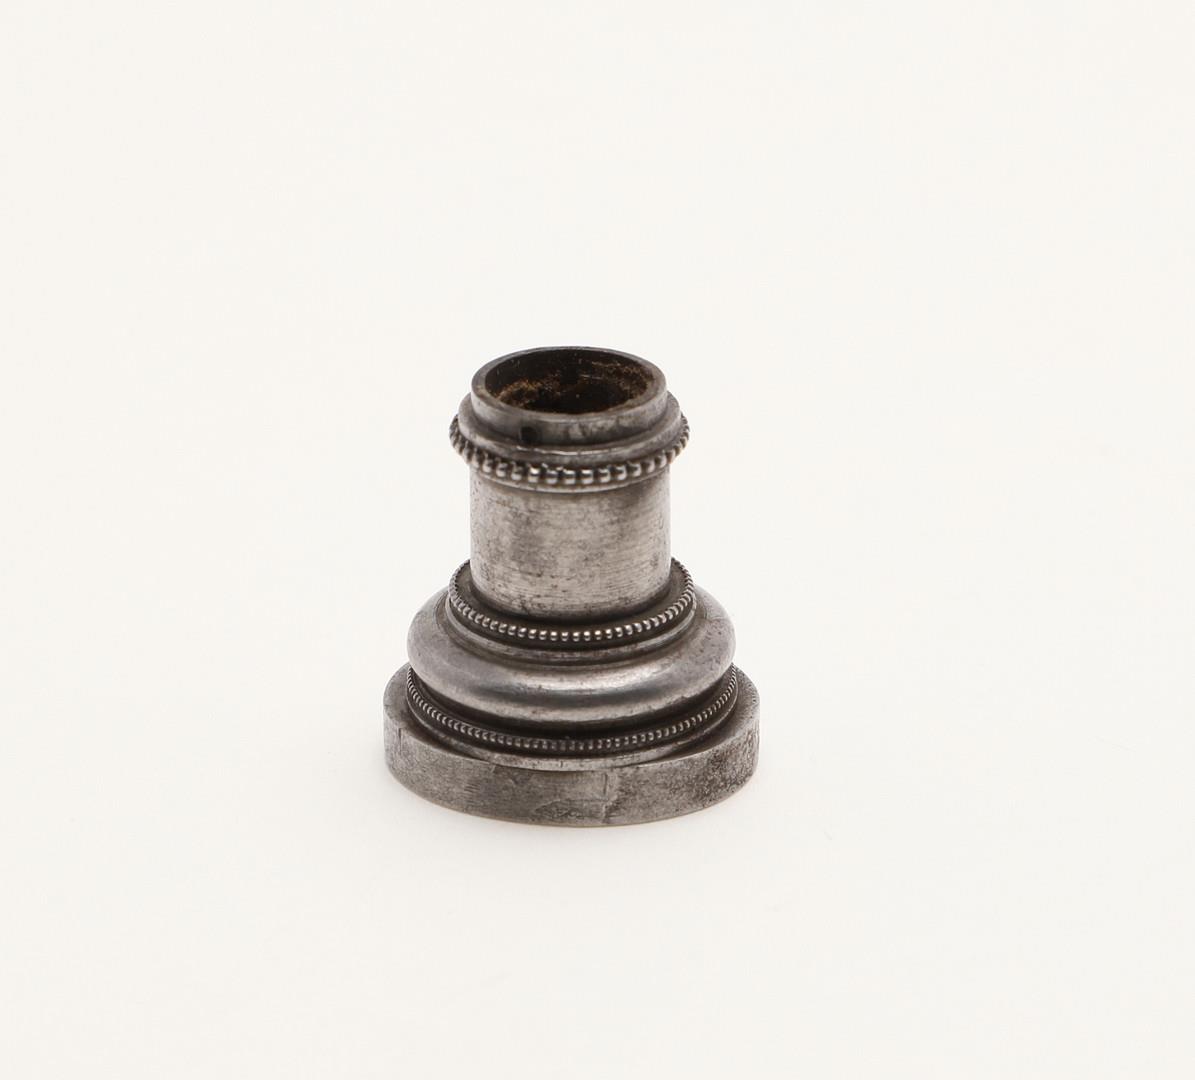 A VICTORIAN STEEL SEAL. - Image 6 of 7